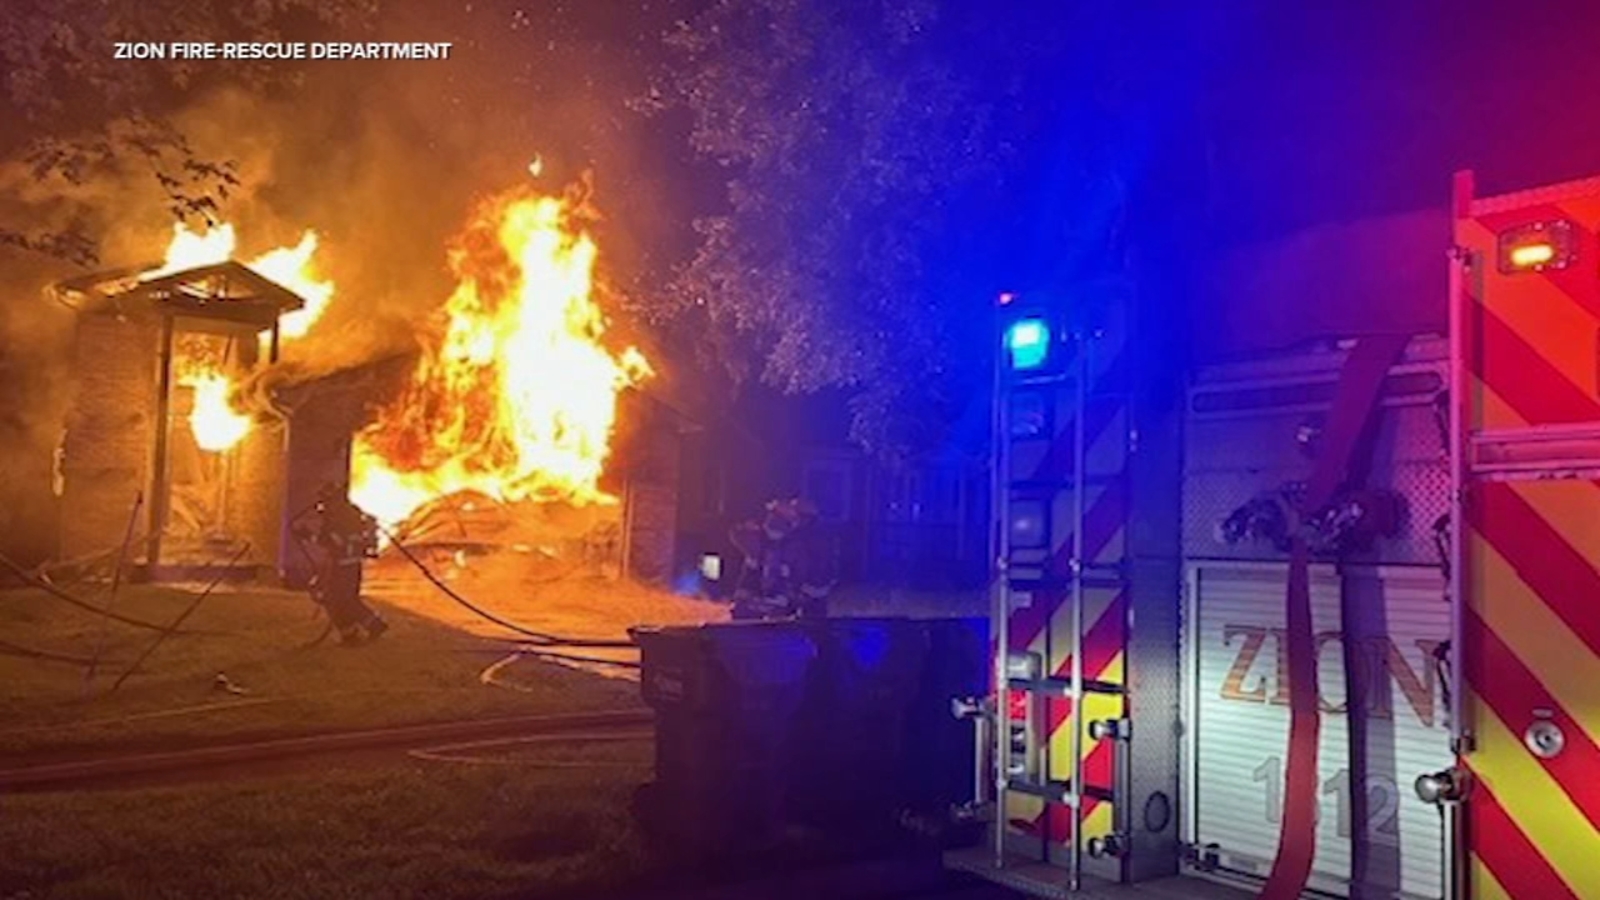 Firefighter injured while battling house fire in Zion, Illinois in 3200-block of Gabriel Avenue, city says [Video]